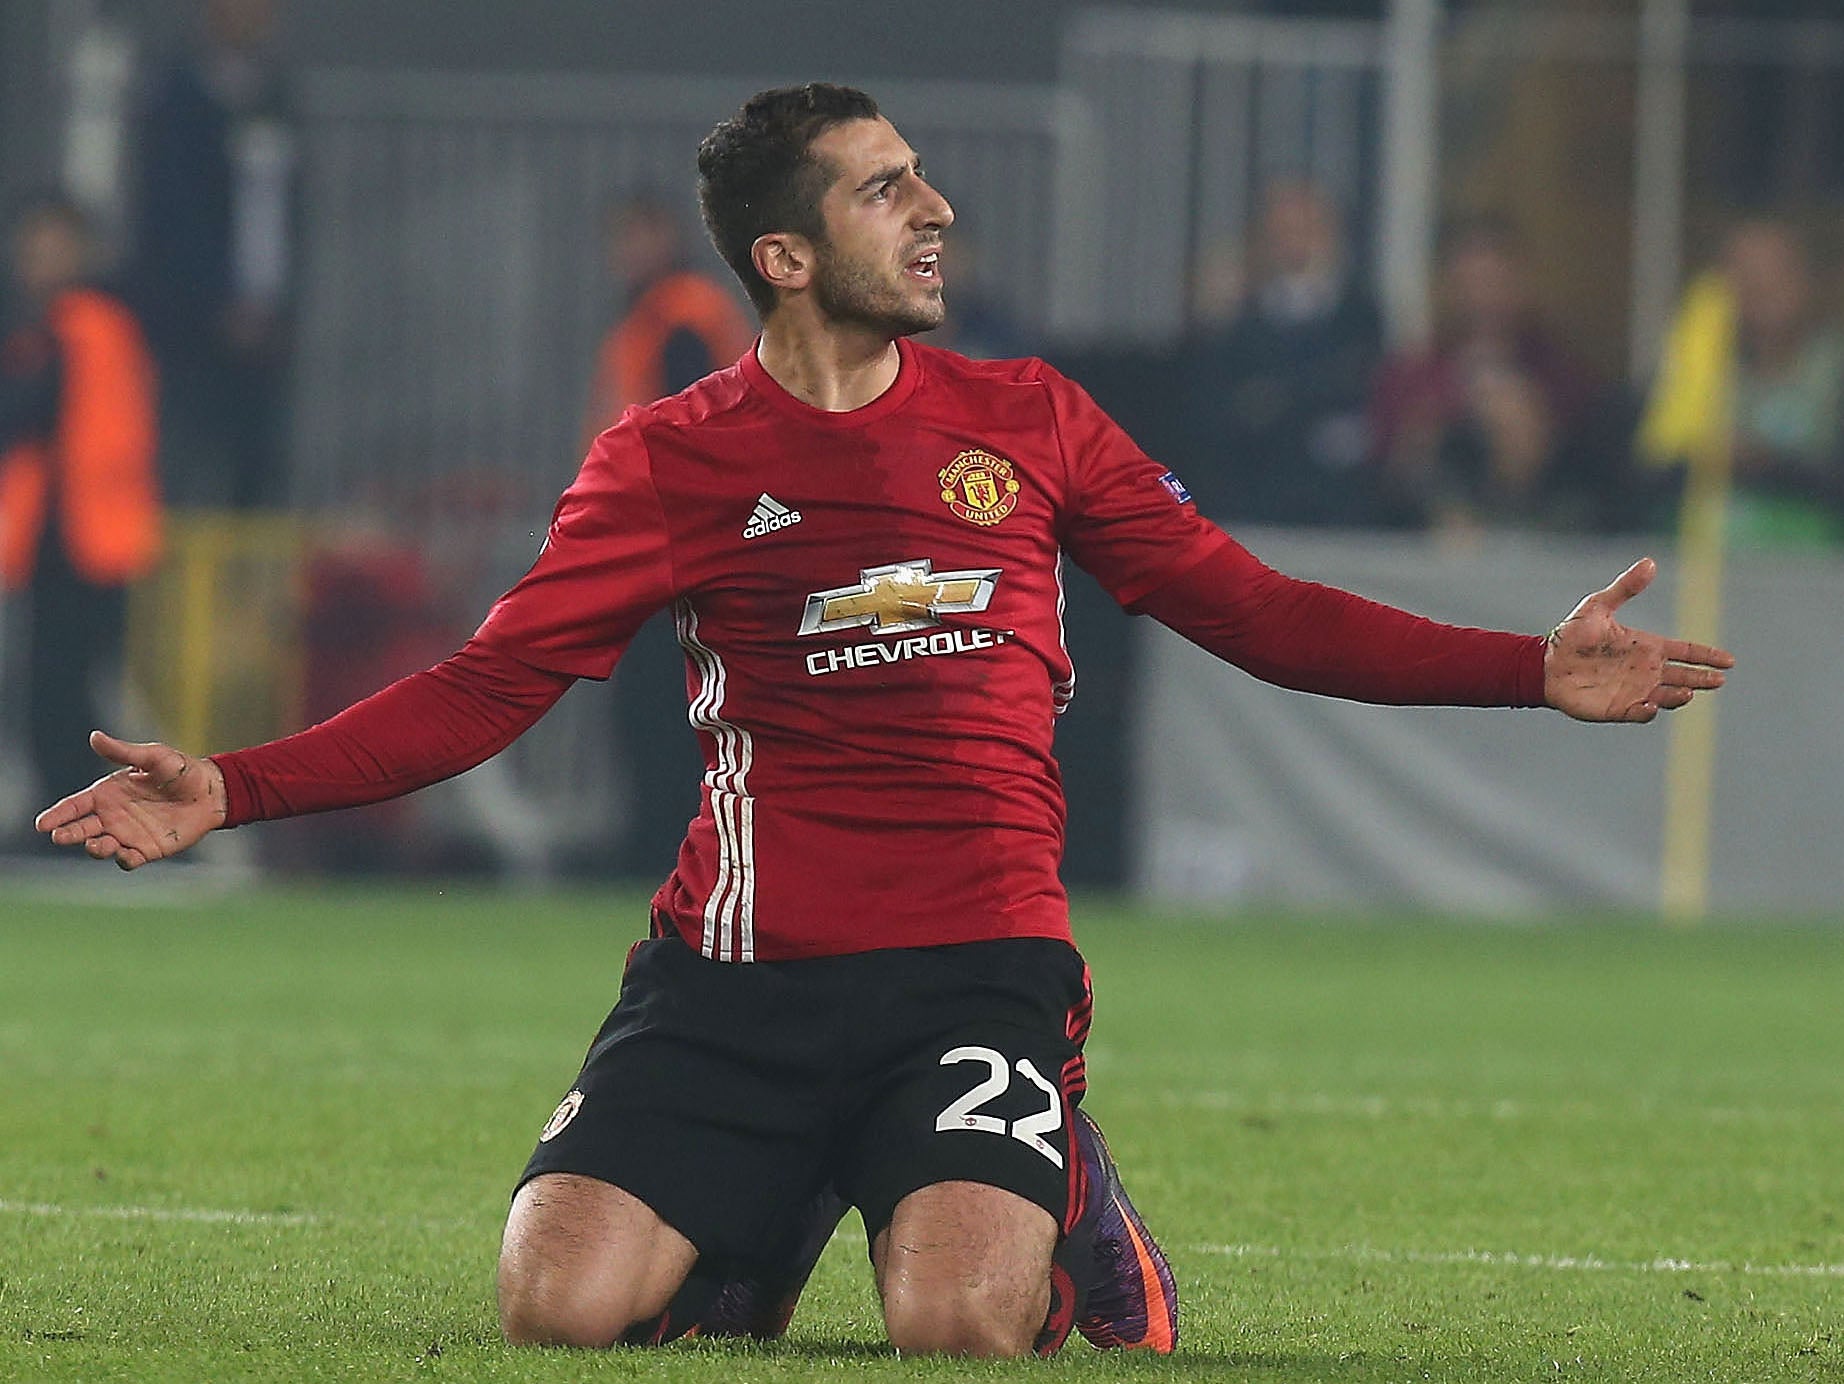 Mkhitaryan has not featured in the league since early September